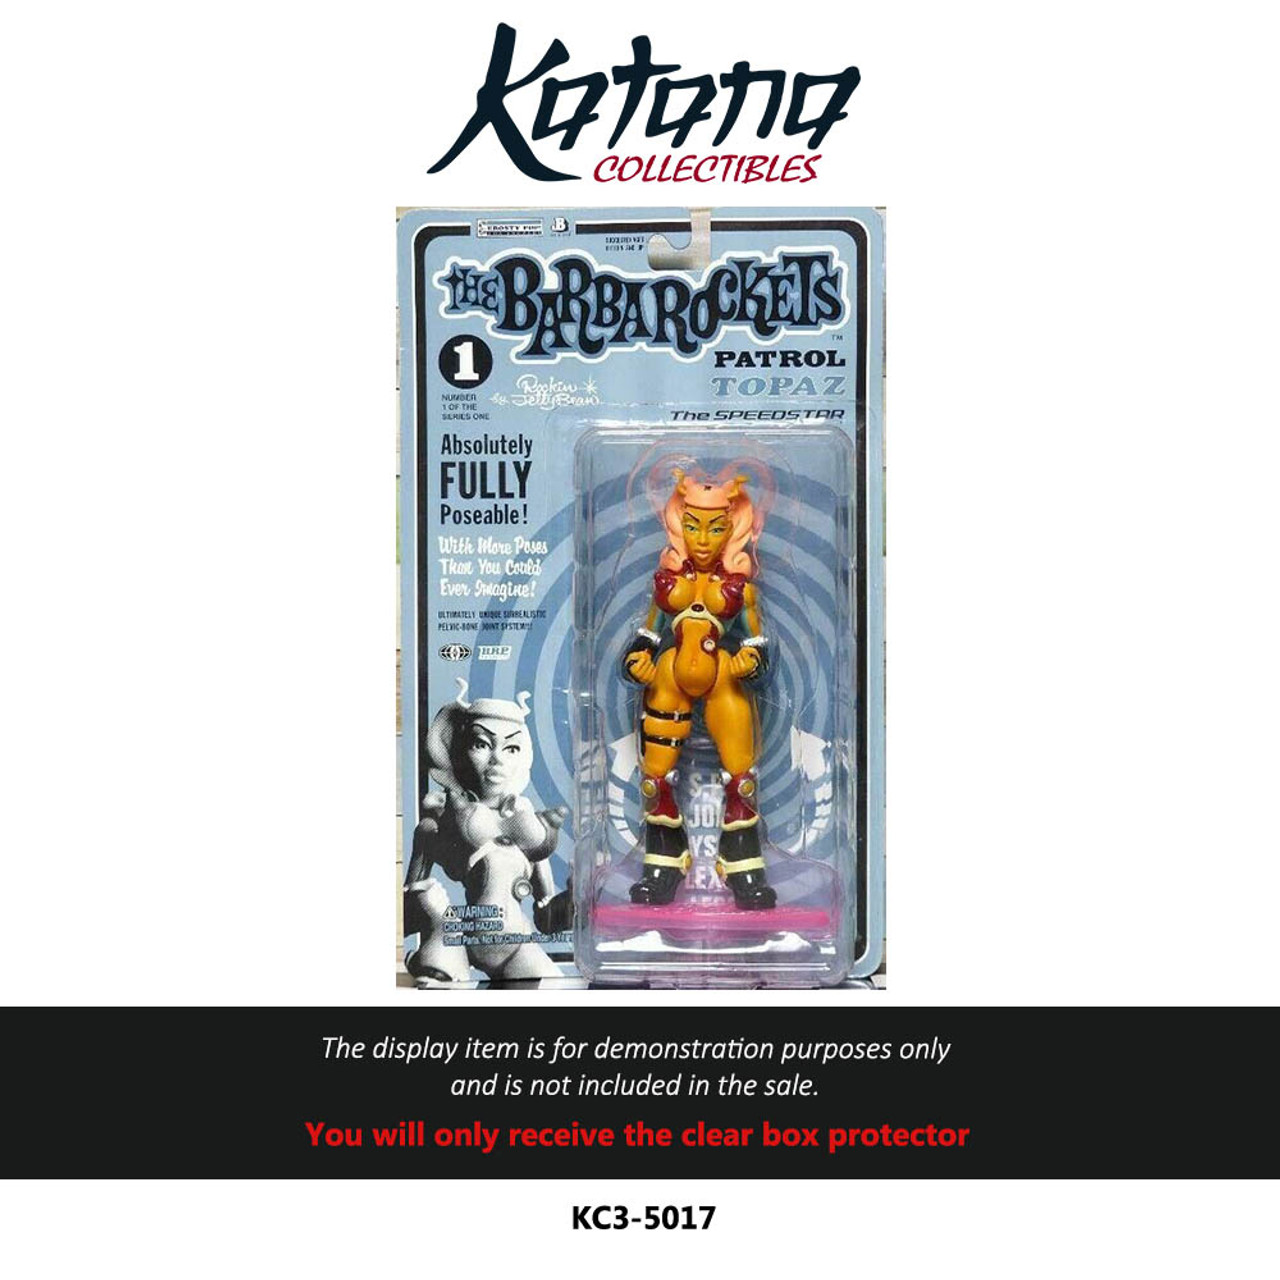 Katana Collectibles Protector For Barba Rocket Patrol Topaz (Carded Figure) by Rockin' Jelly Bean